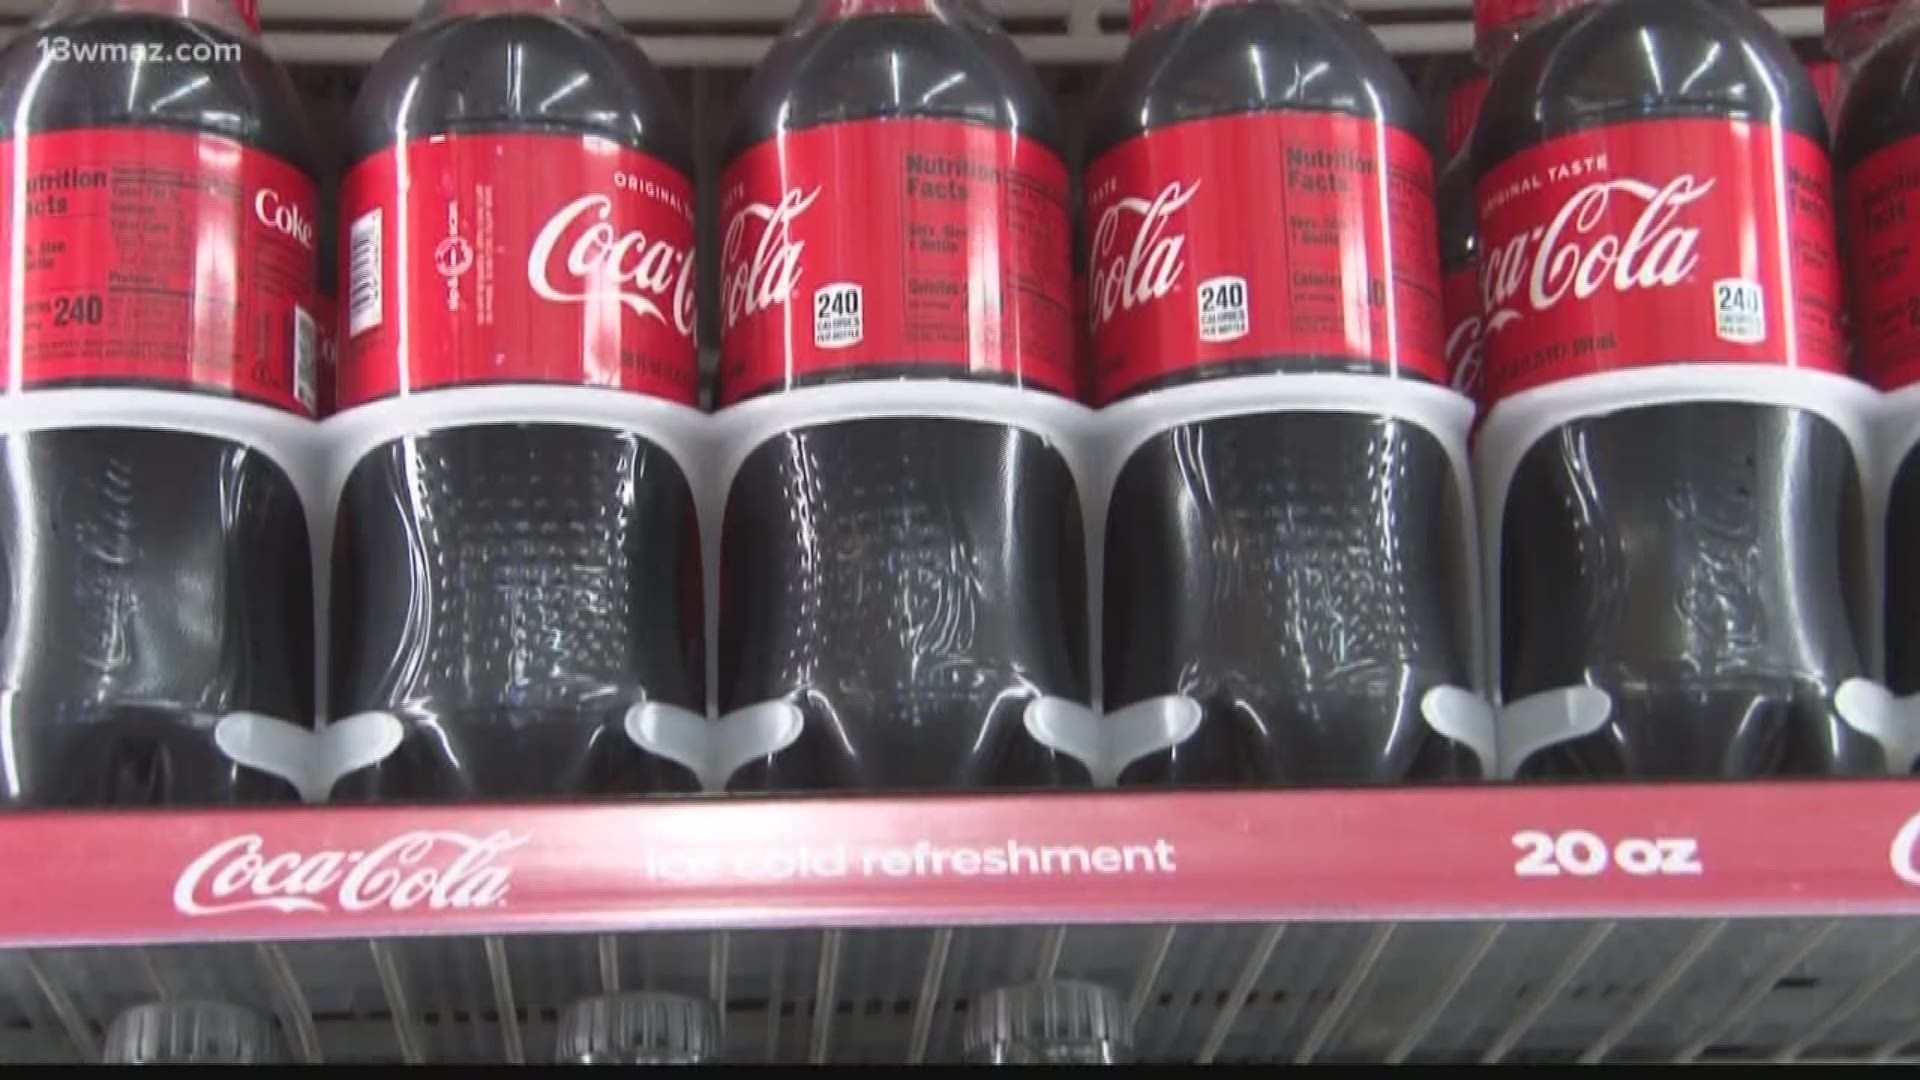 Off the Beaten Path: Coca-Cola inventor from Knoxville, Ga.